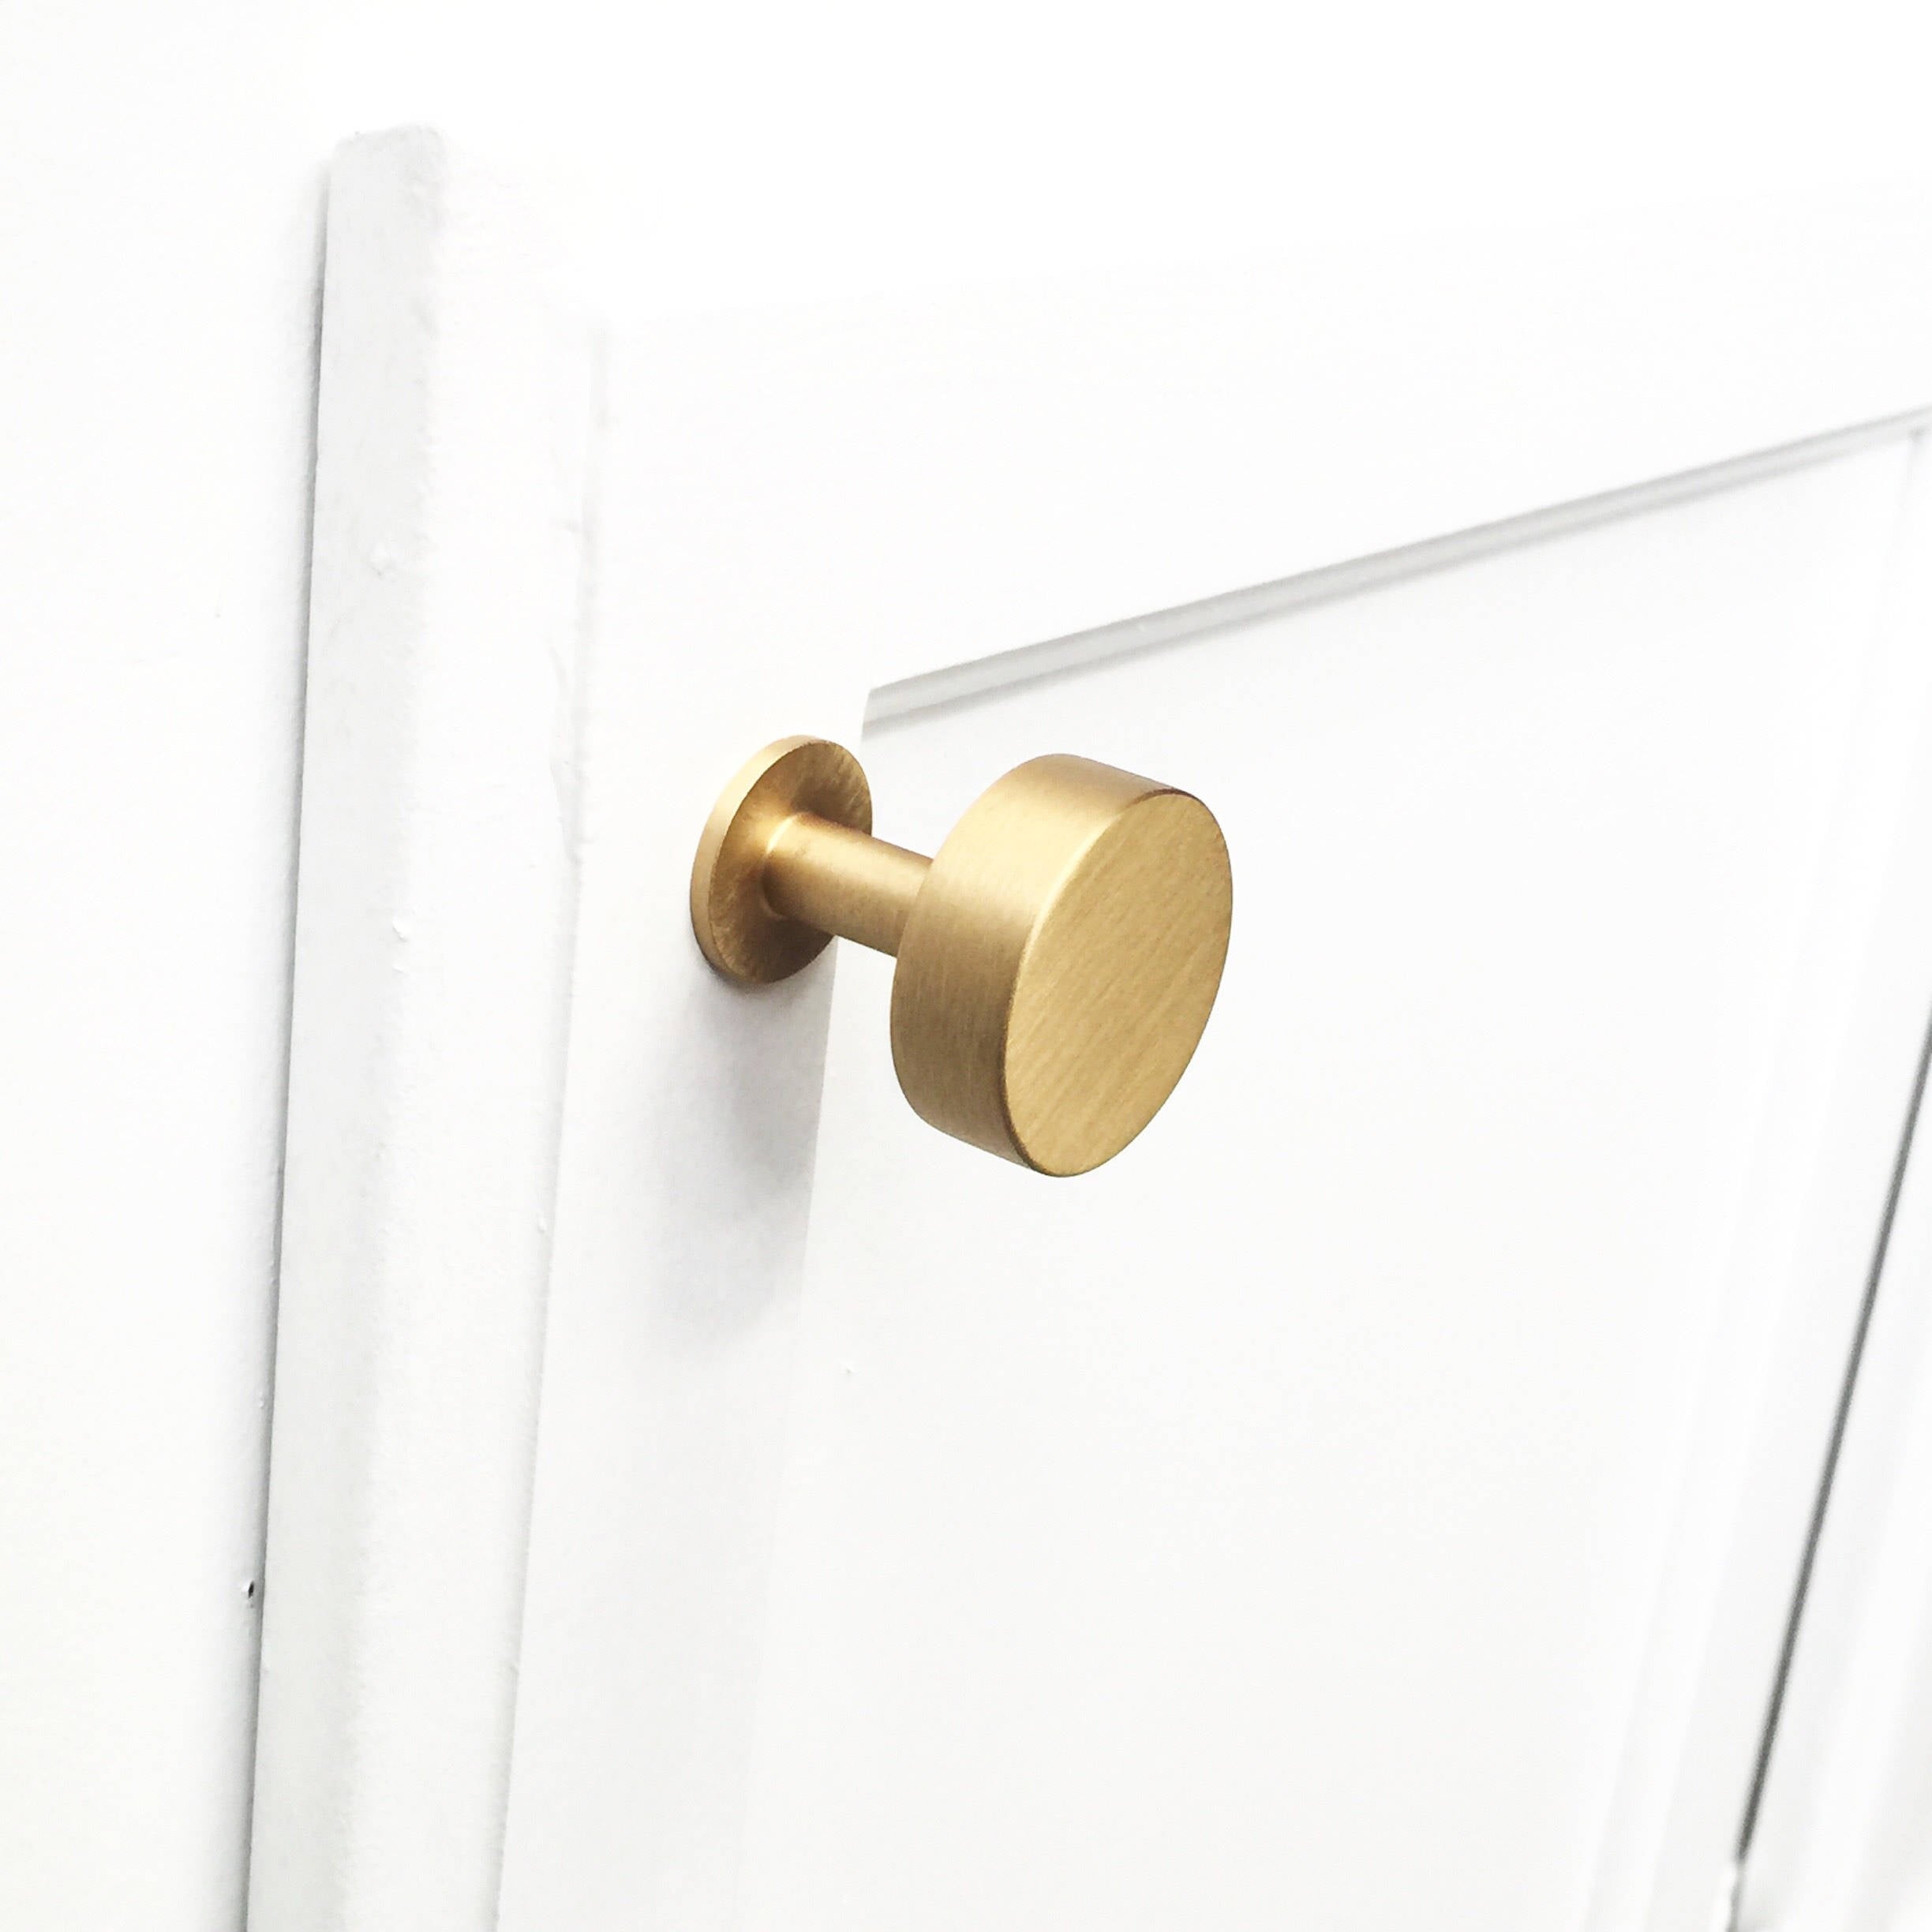 Lew's Square Bar Cabinet Knobs and Handles in Brushed Brass